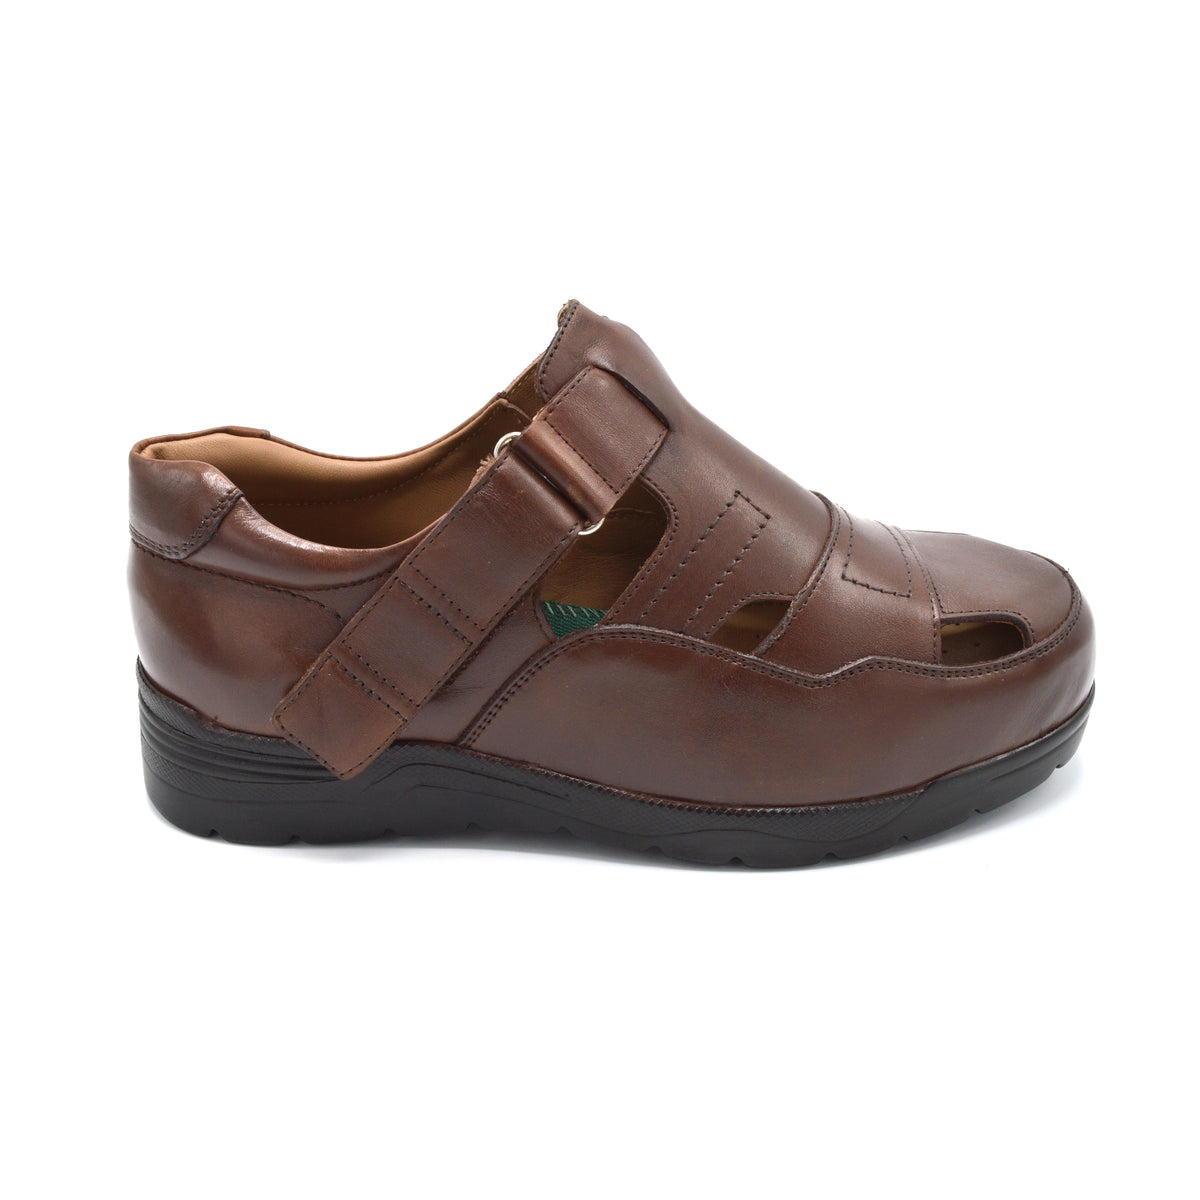 Extra Wide Men's Sandals - Velcro Close and Lace Up. — Wide Shoes